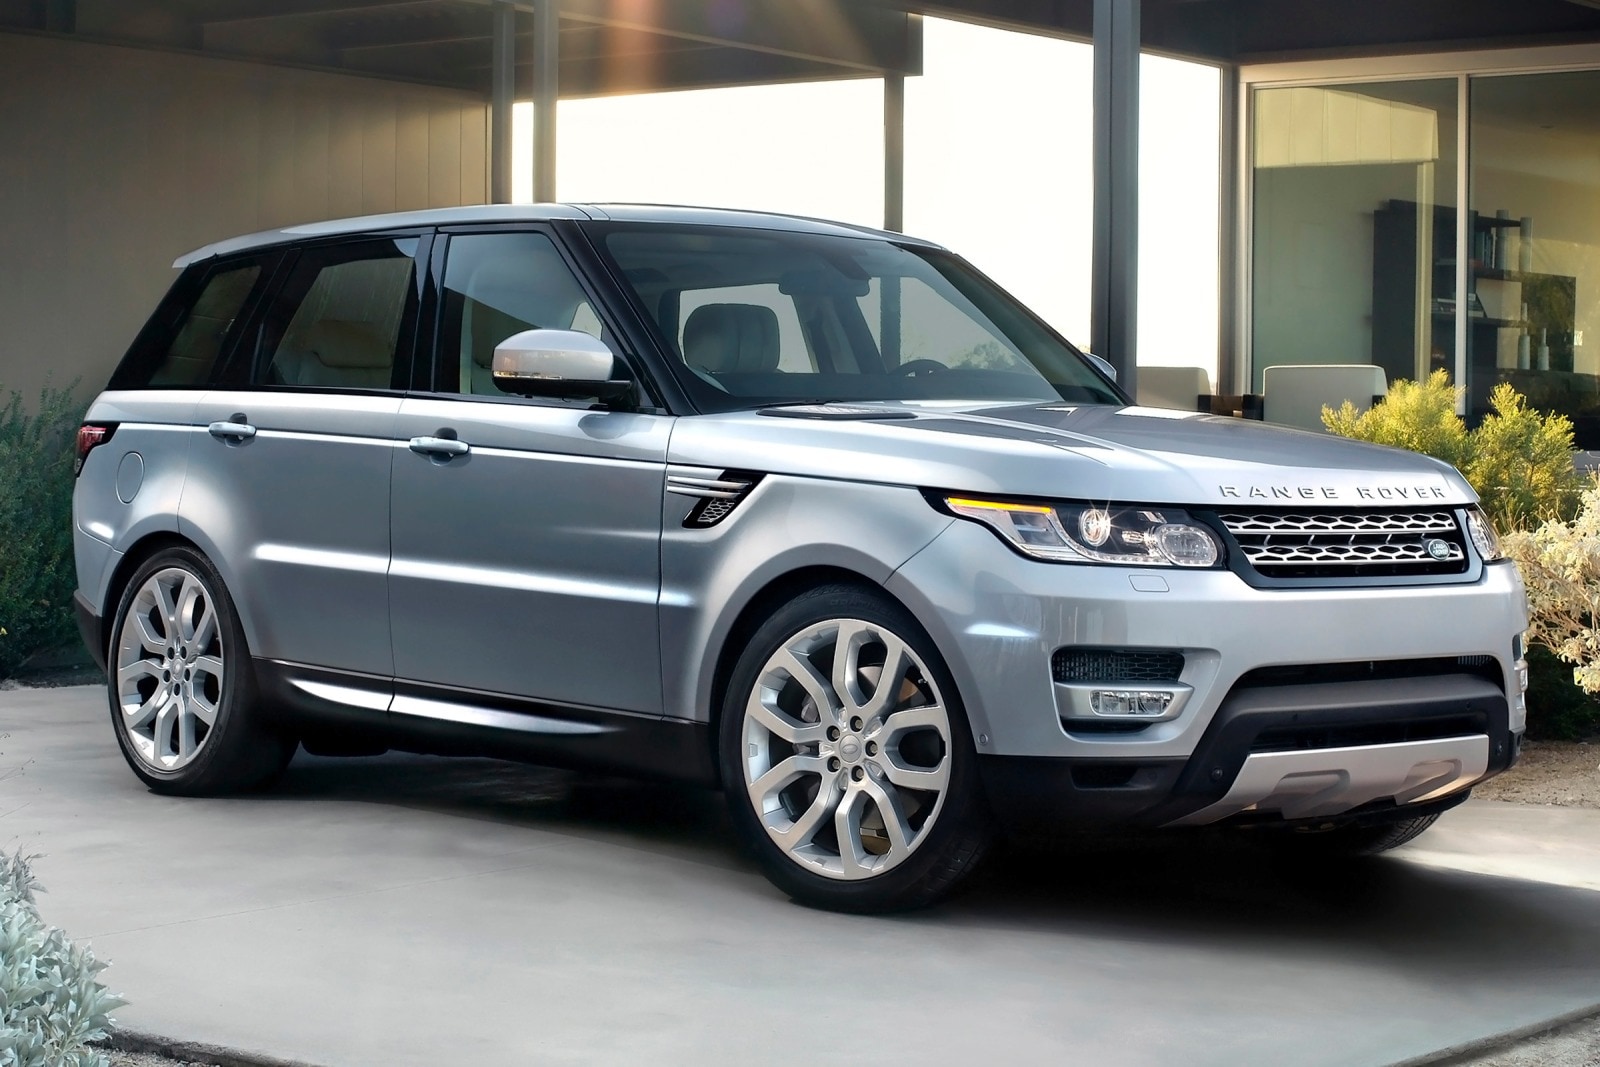 2014 Land Rover Range Rover Sport Review & Ratings | Edmunds